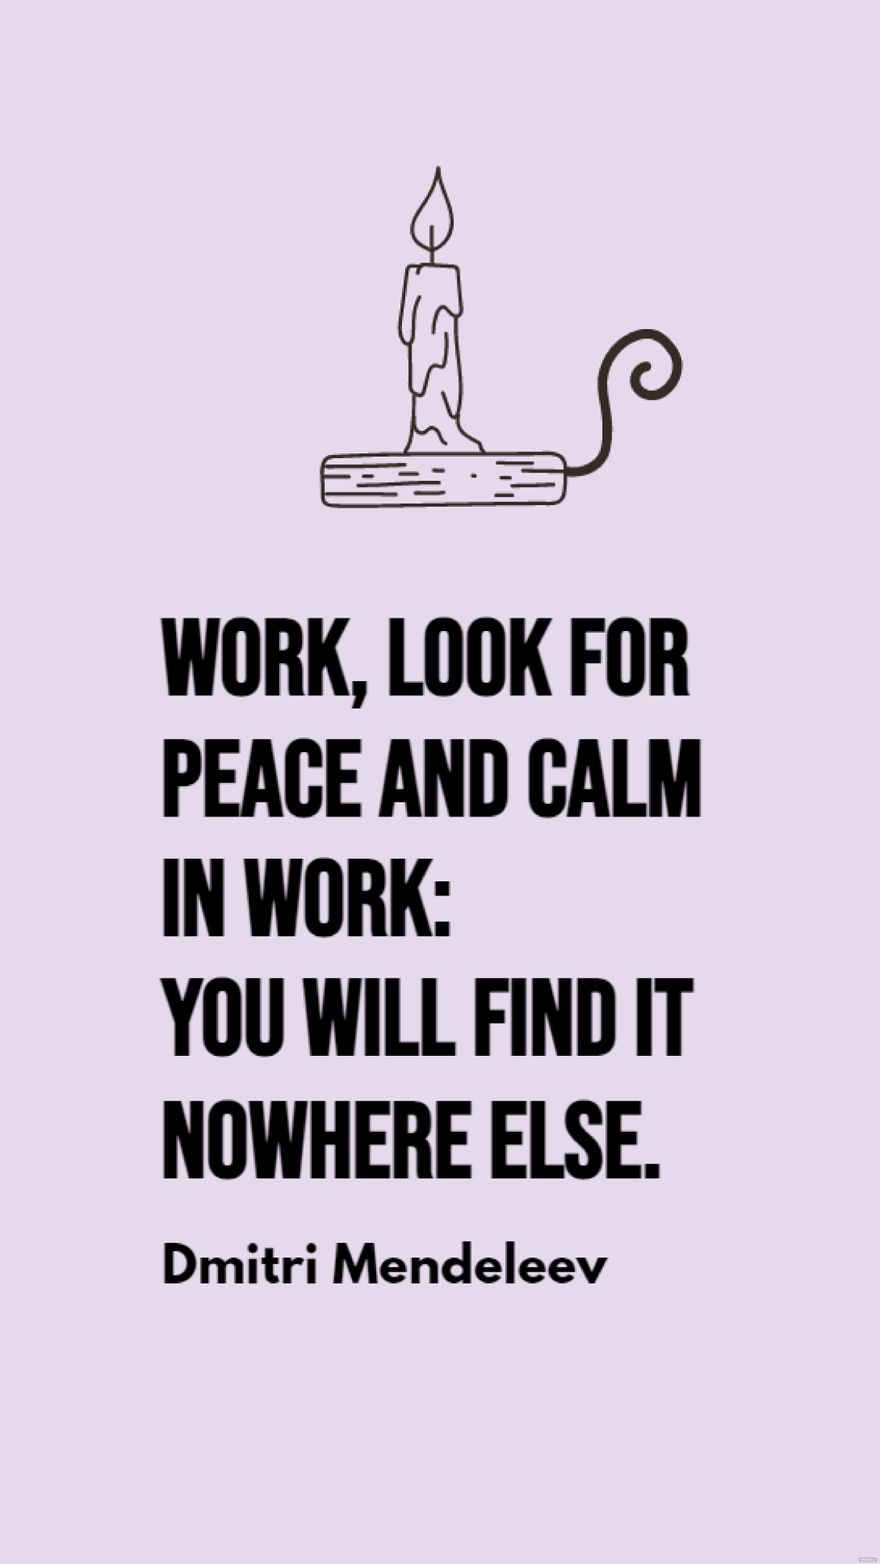 Dmitri Mendeleev - Work, look for peace and calm in work: you will find it nowhere else.